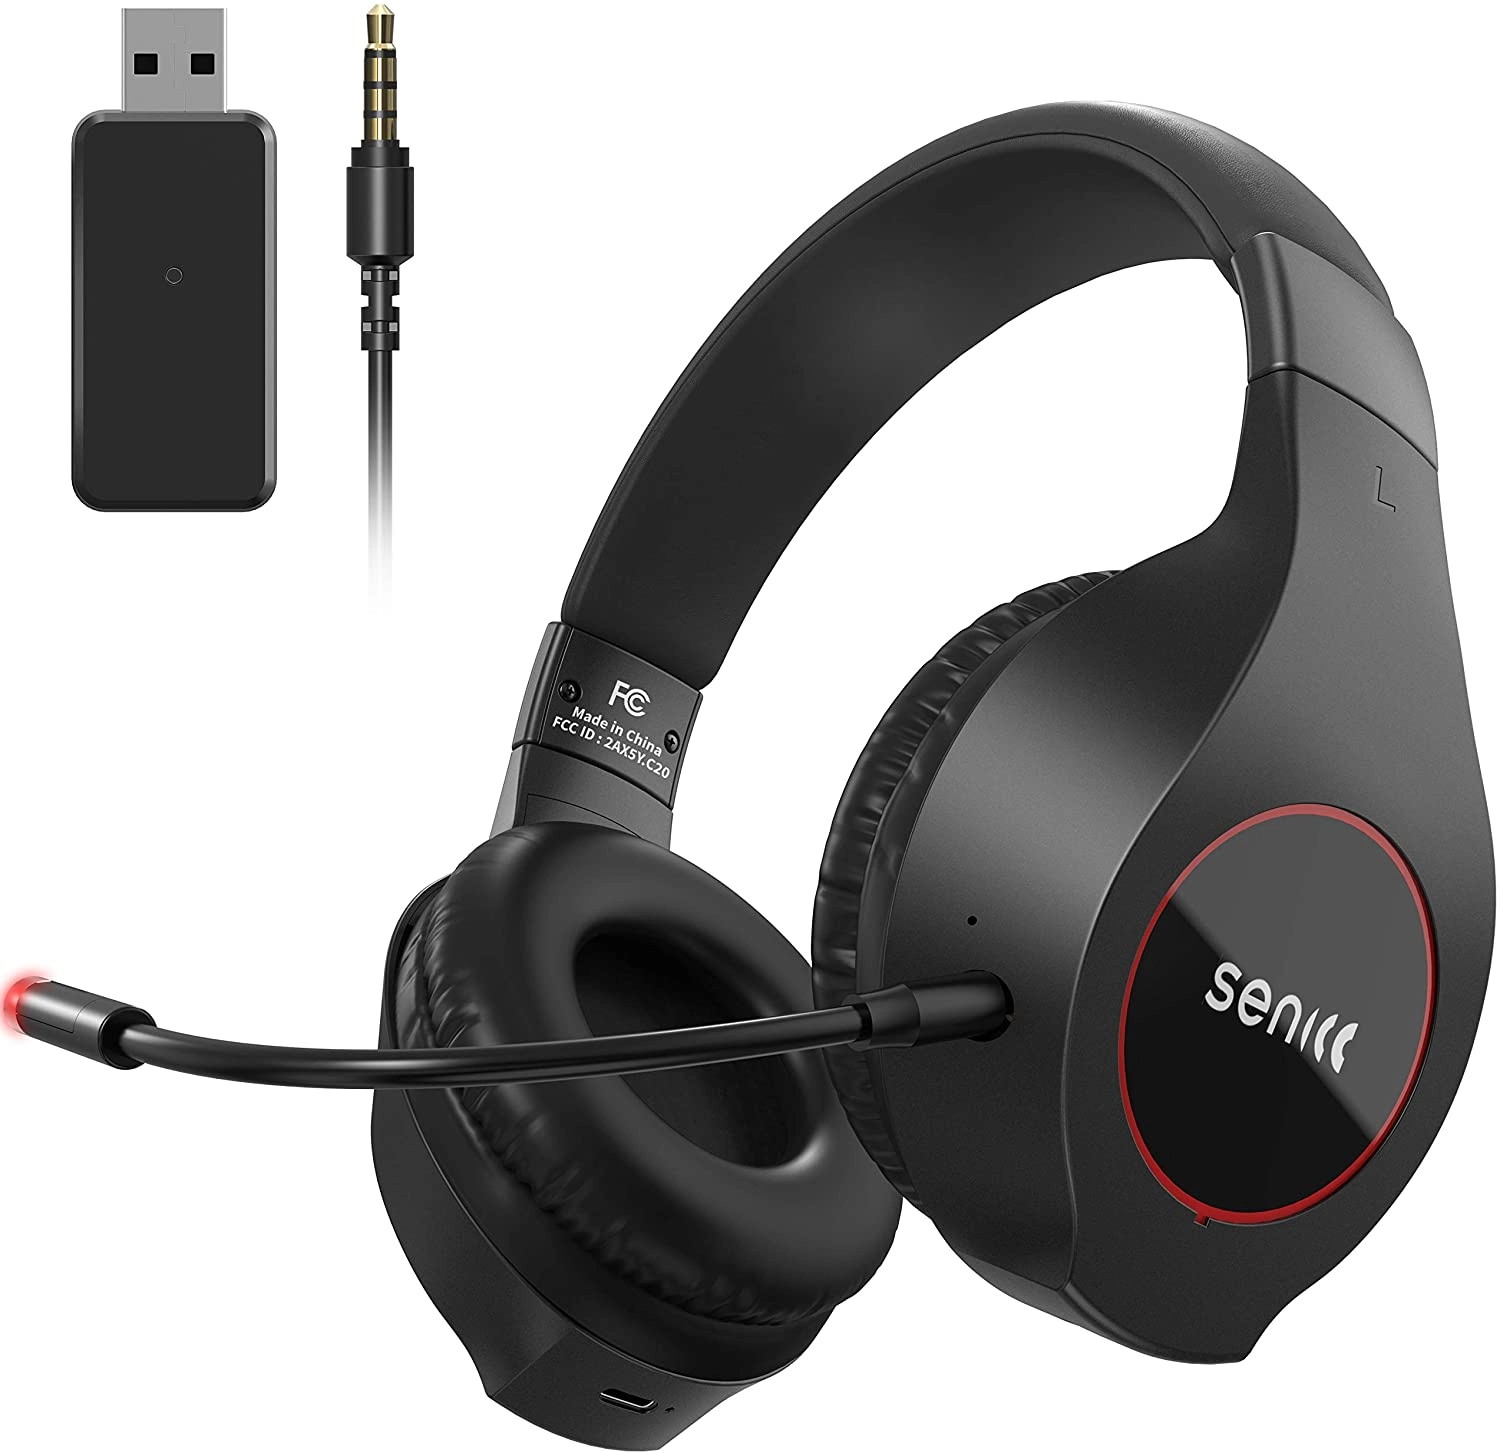 SOMIC C20 2.4G wireless gaming headset with microphone